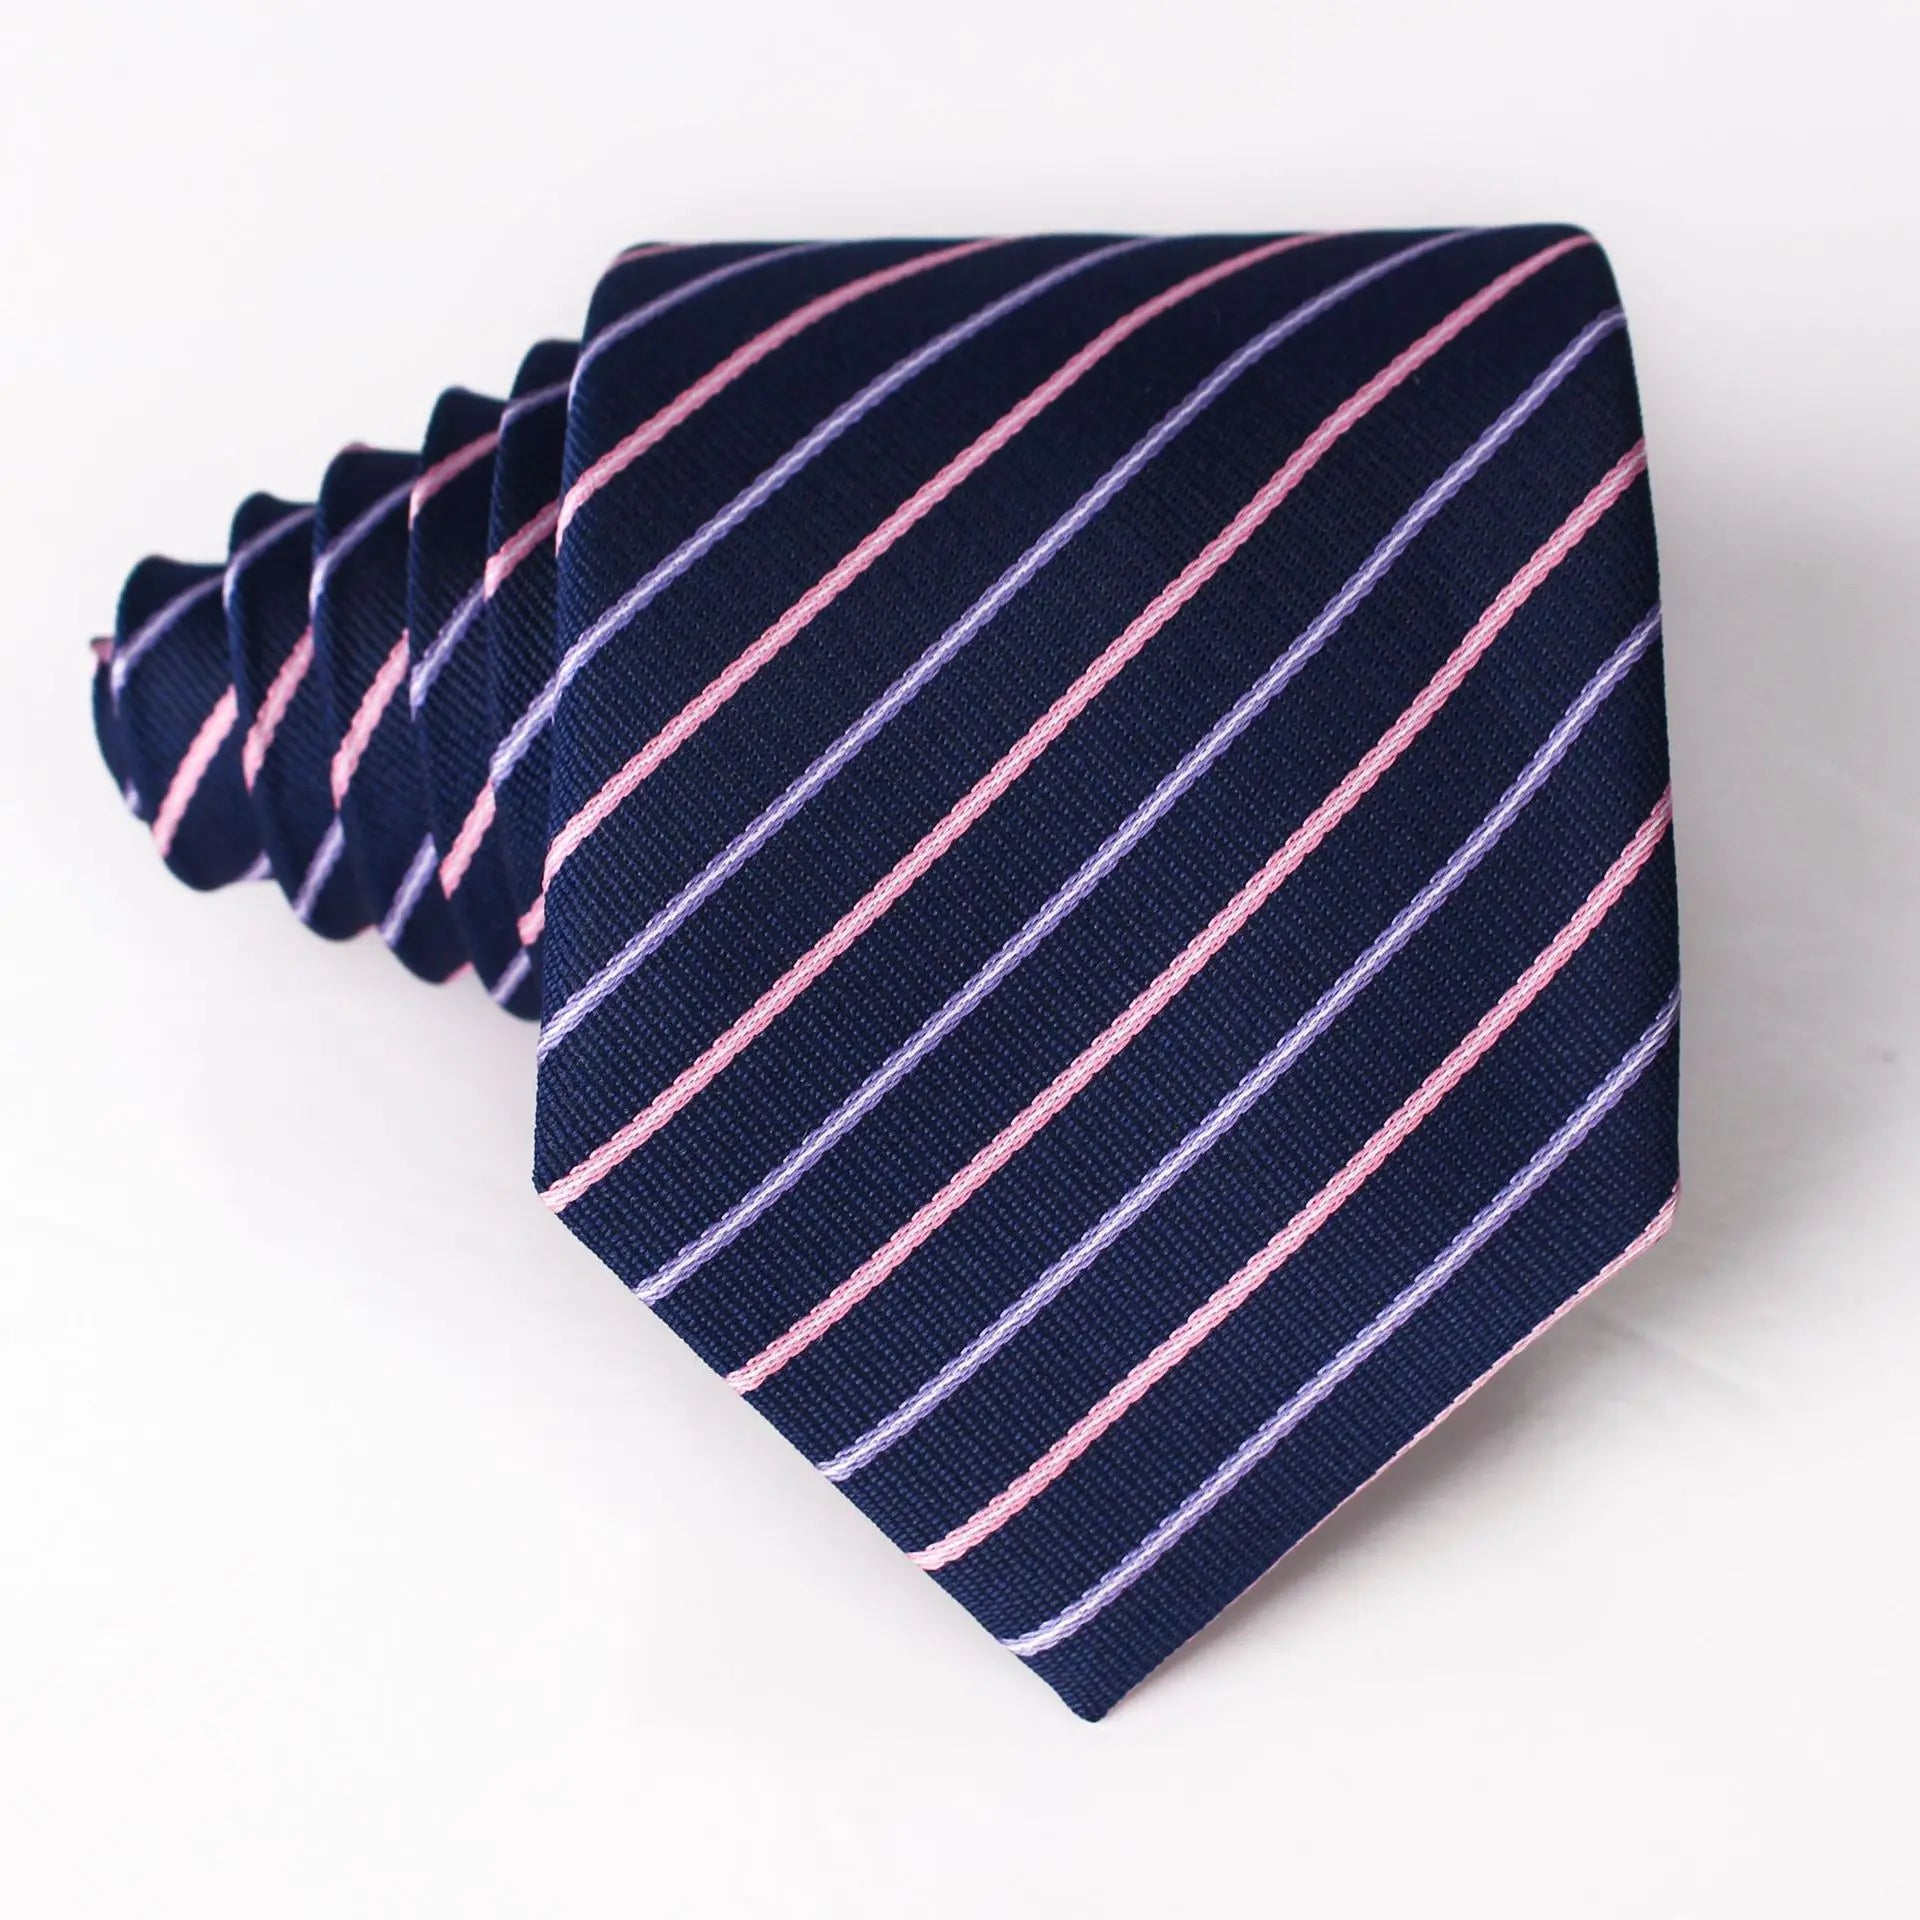 Navy with thin pink and purple stripes tie   8cm